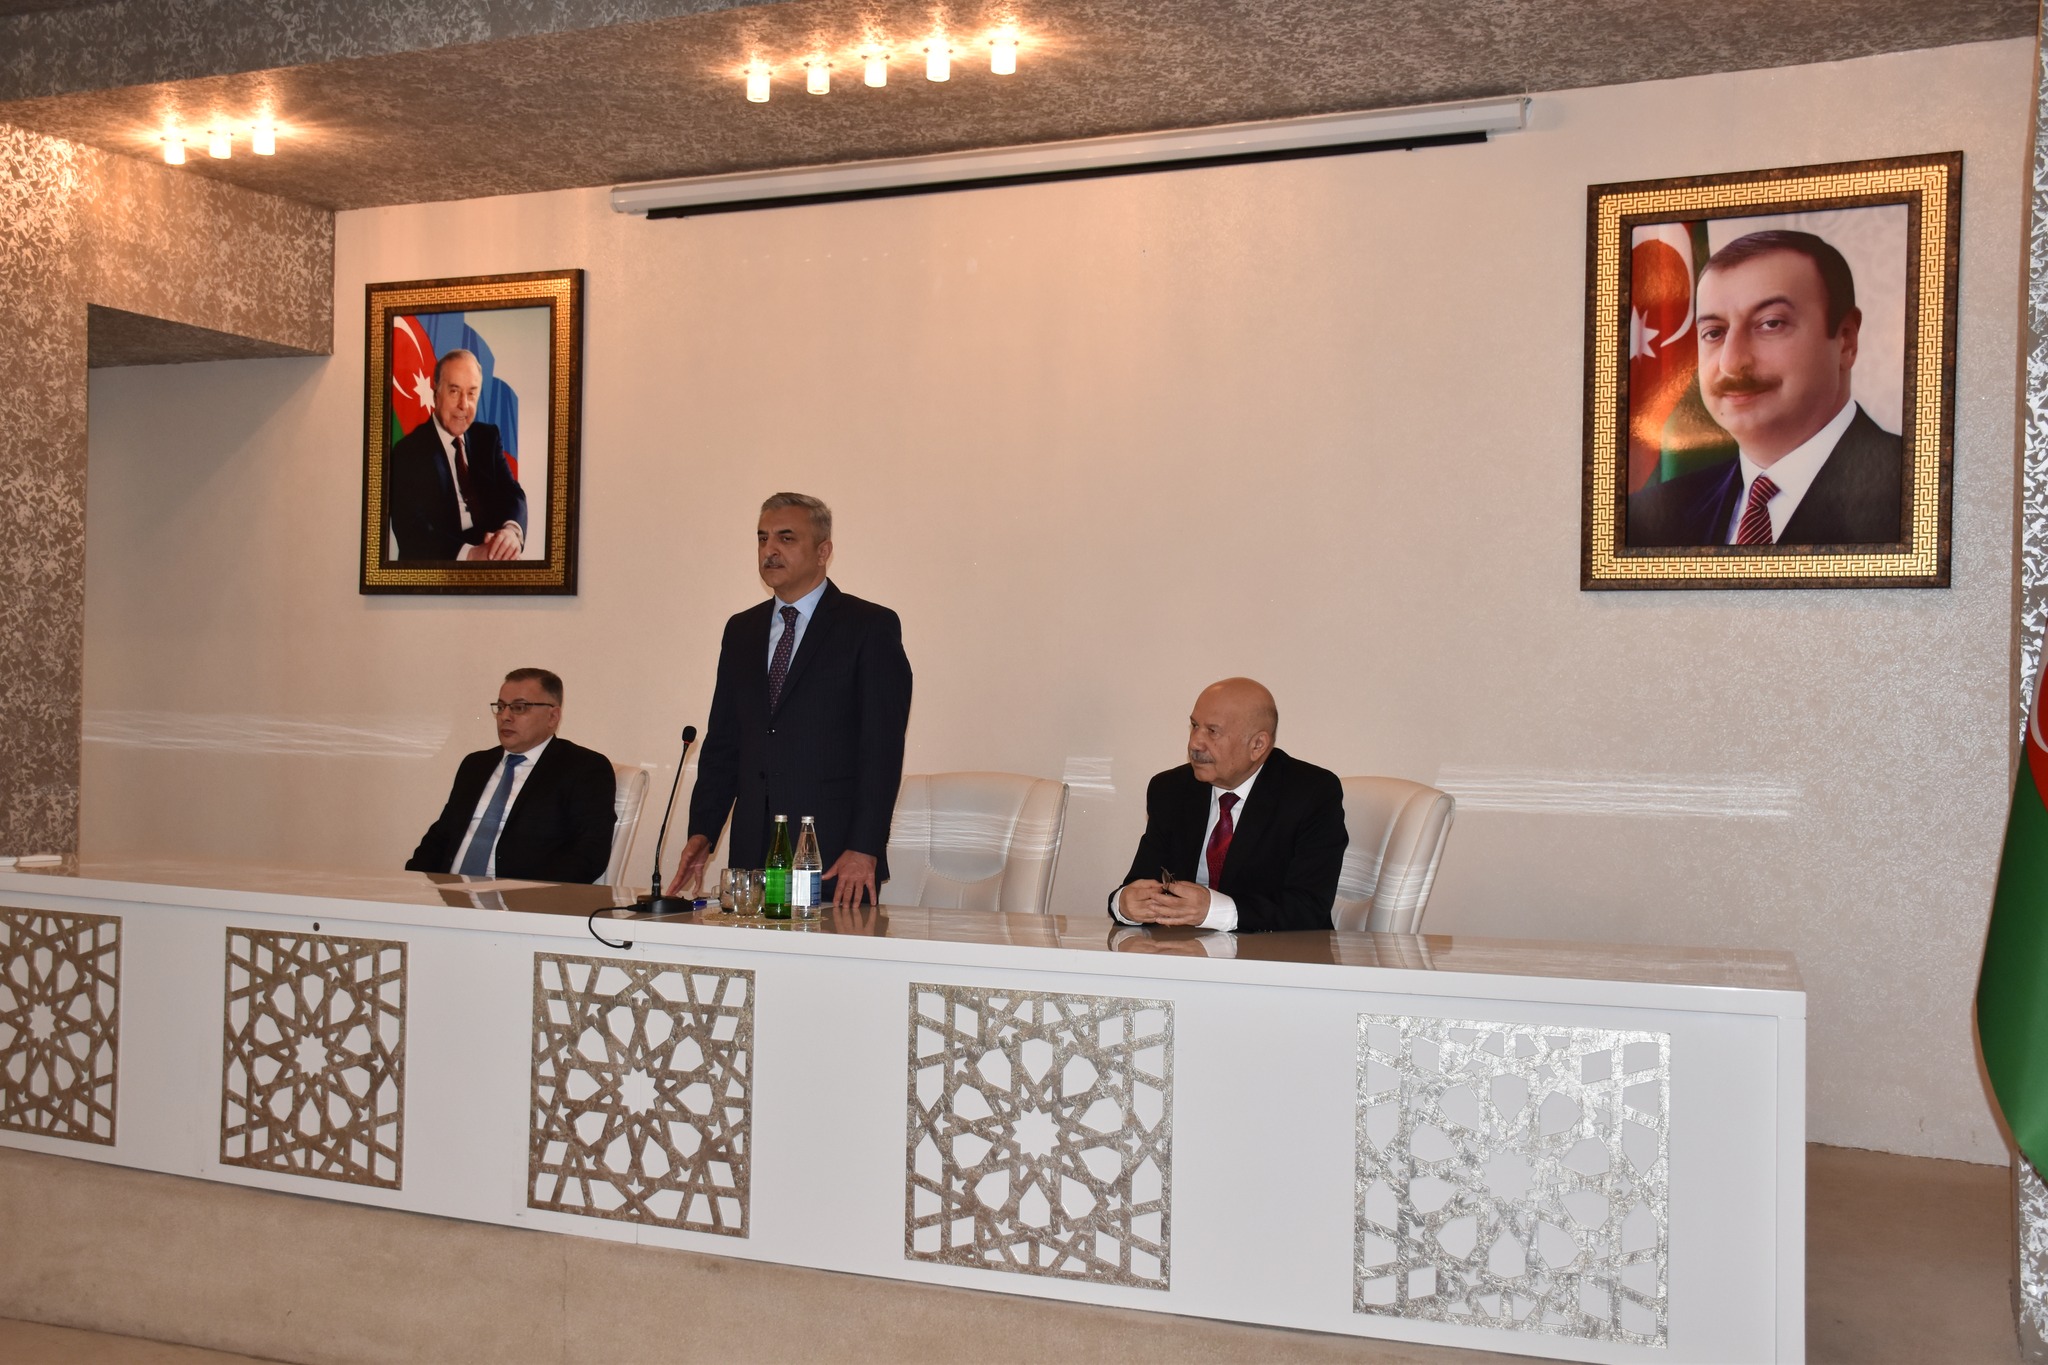 Vusal Gasimli spoke at the conference on "Heydar Aliyev and the ideology of Azerbaijanism"